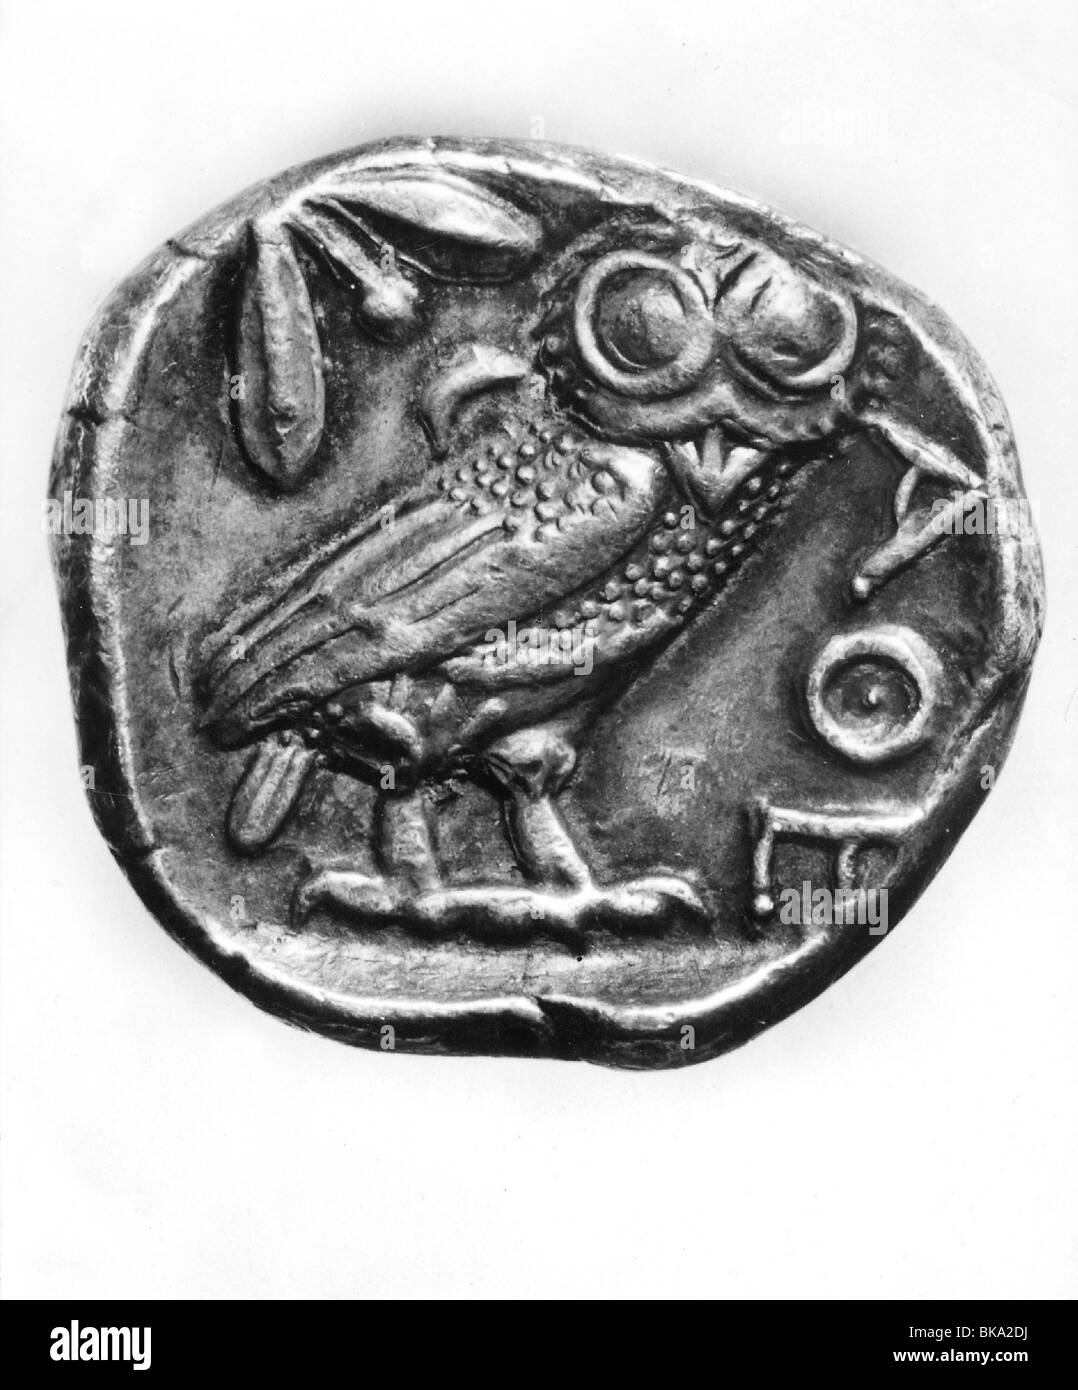 money / finance, coins, Greek drachma, Athenian tetradrachmon, owl of Athena, silver coin, 454 - 449 BC, historic, historical, hard cash, clipping, cut out, cut-out, cut-outs, numismatics, ancient world, Stock Photo